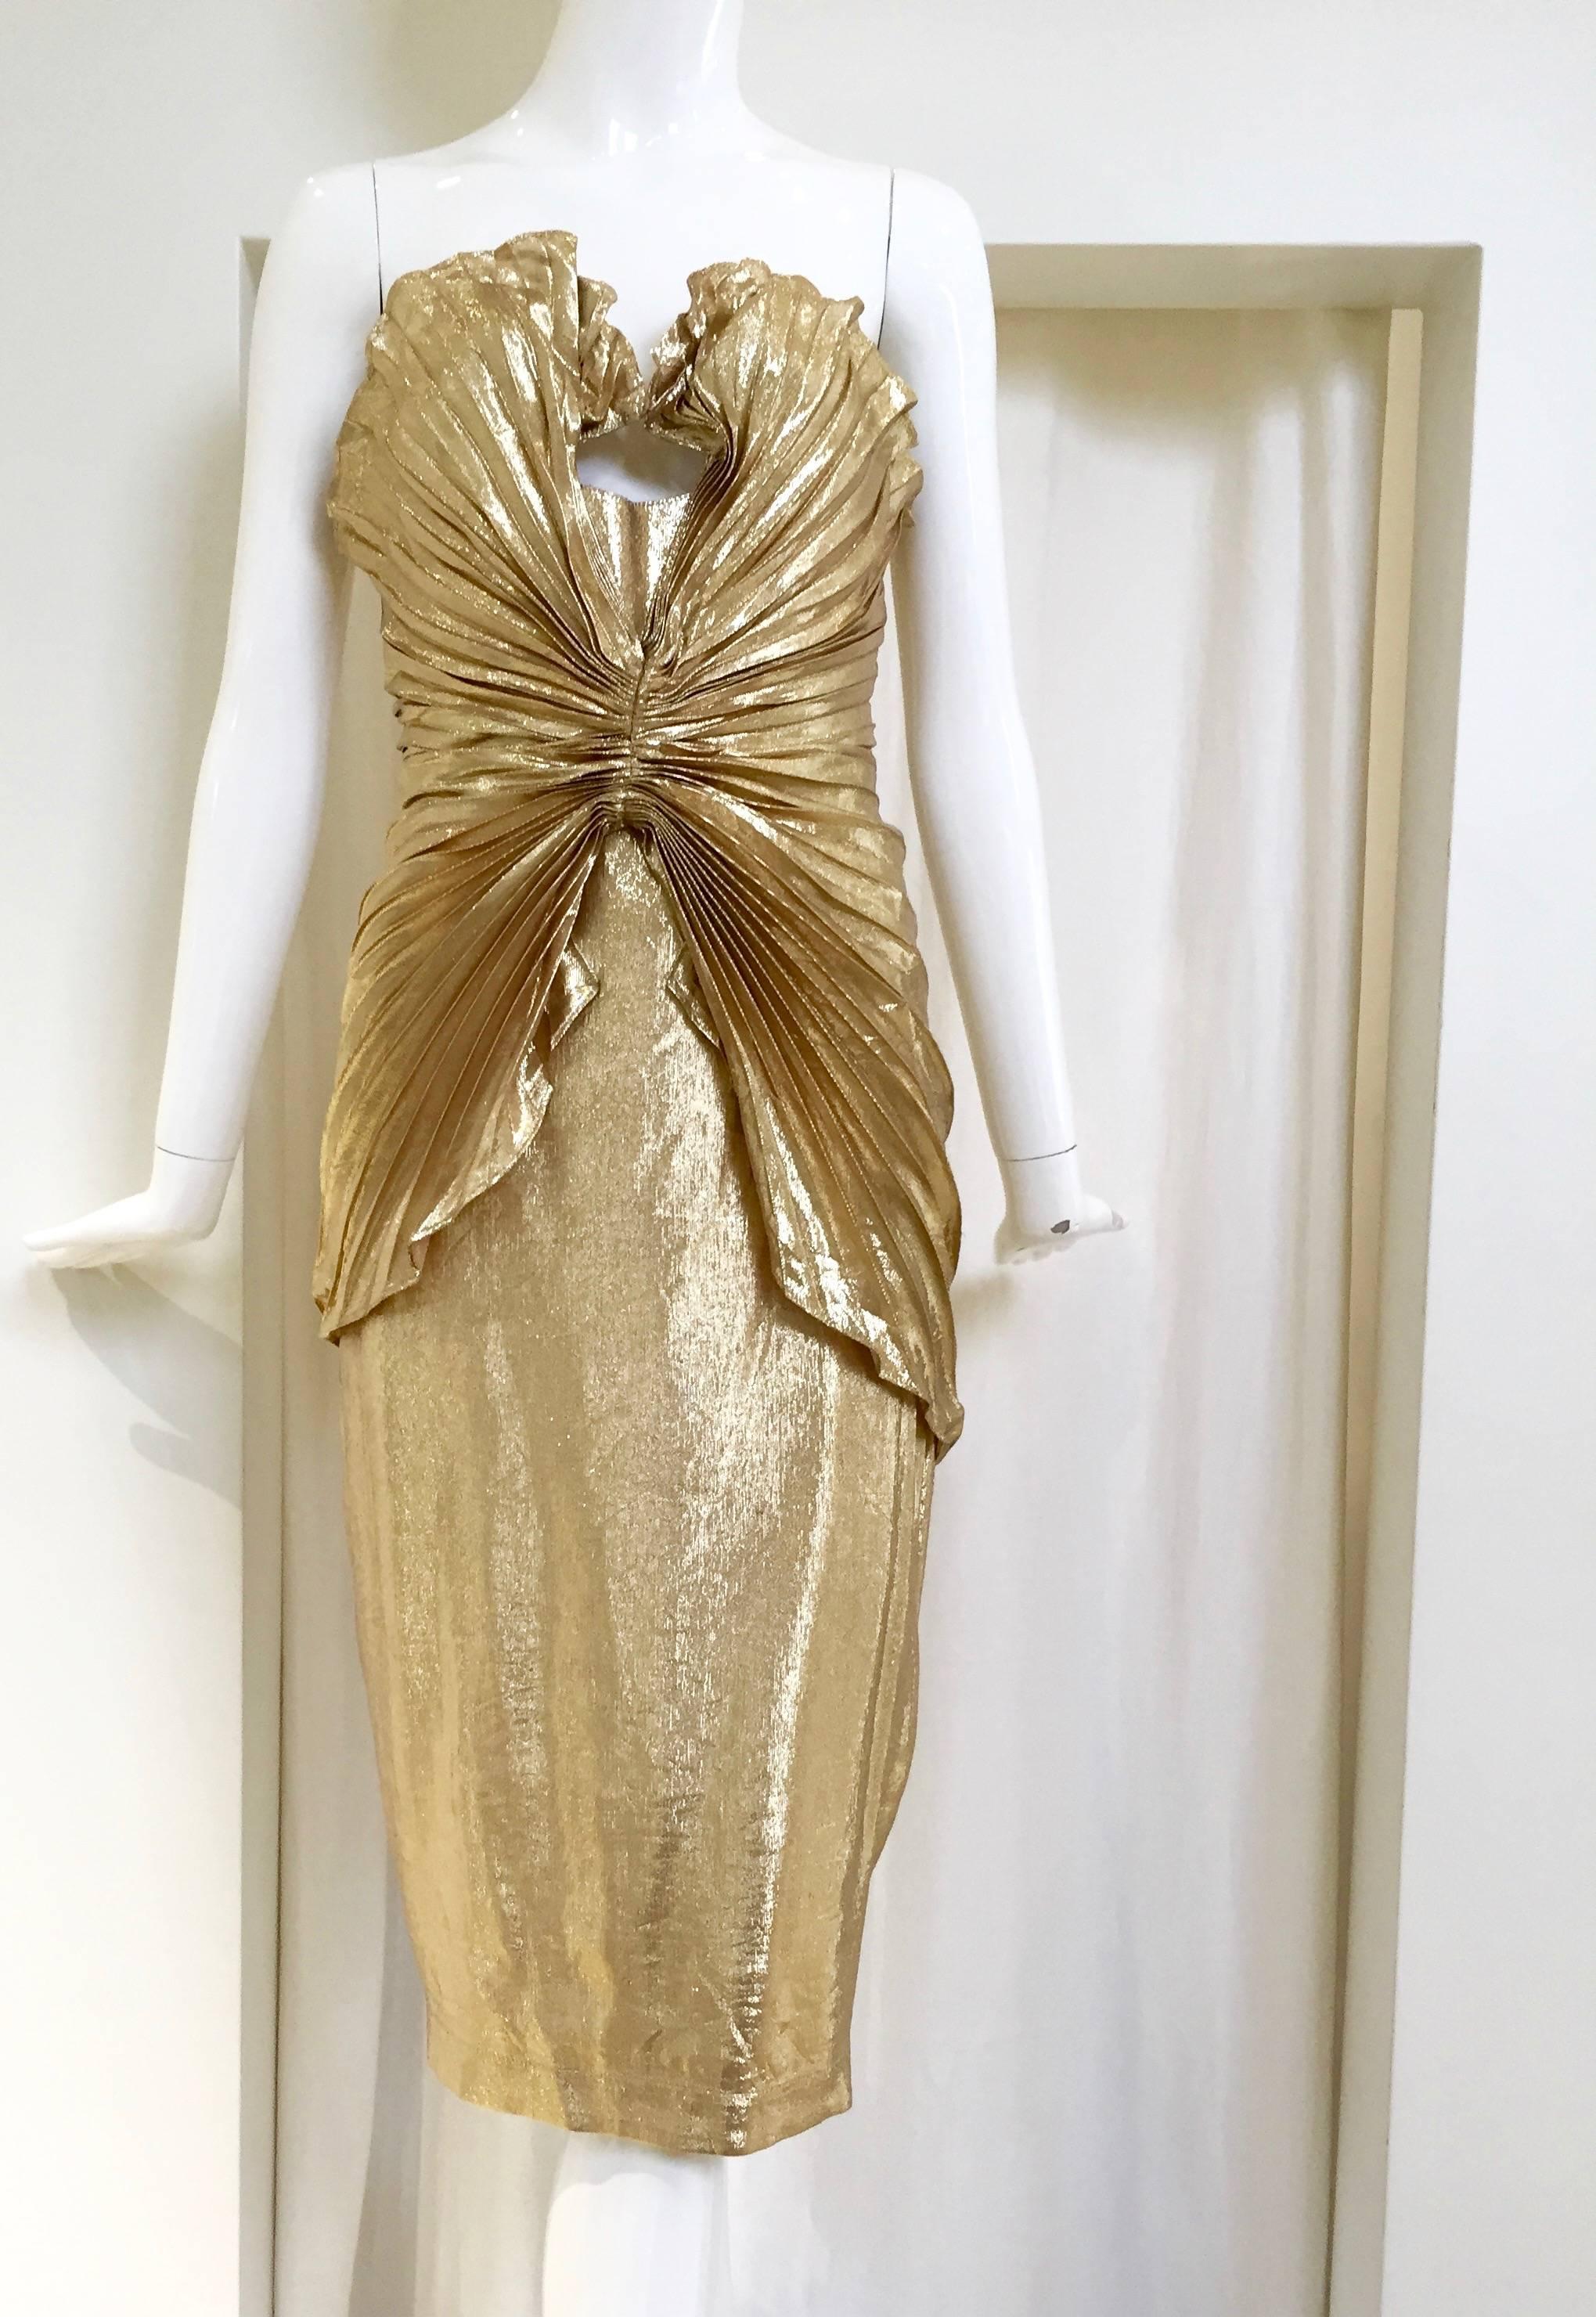 Vintage  late 80s Thierry Mugler  Iconic gold silk lame bustier dress. Size: 2
Bust: 3o"
Waist: 26"
Hip: 36"
Length: 36 1/2
